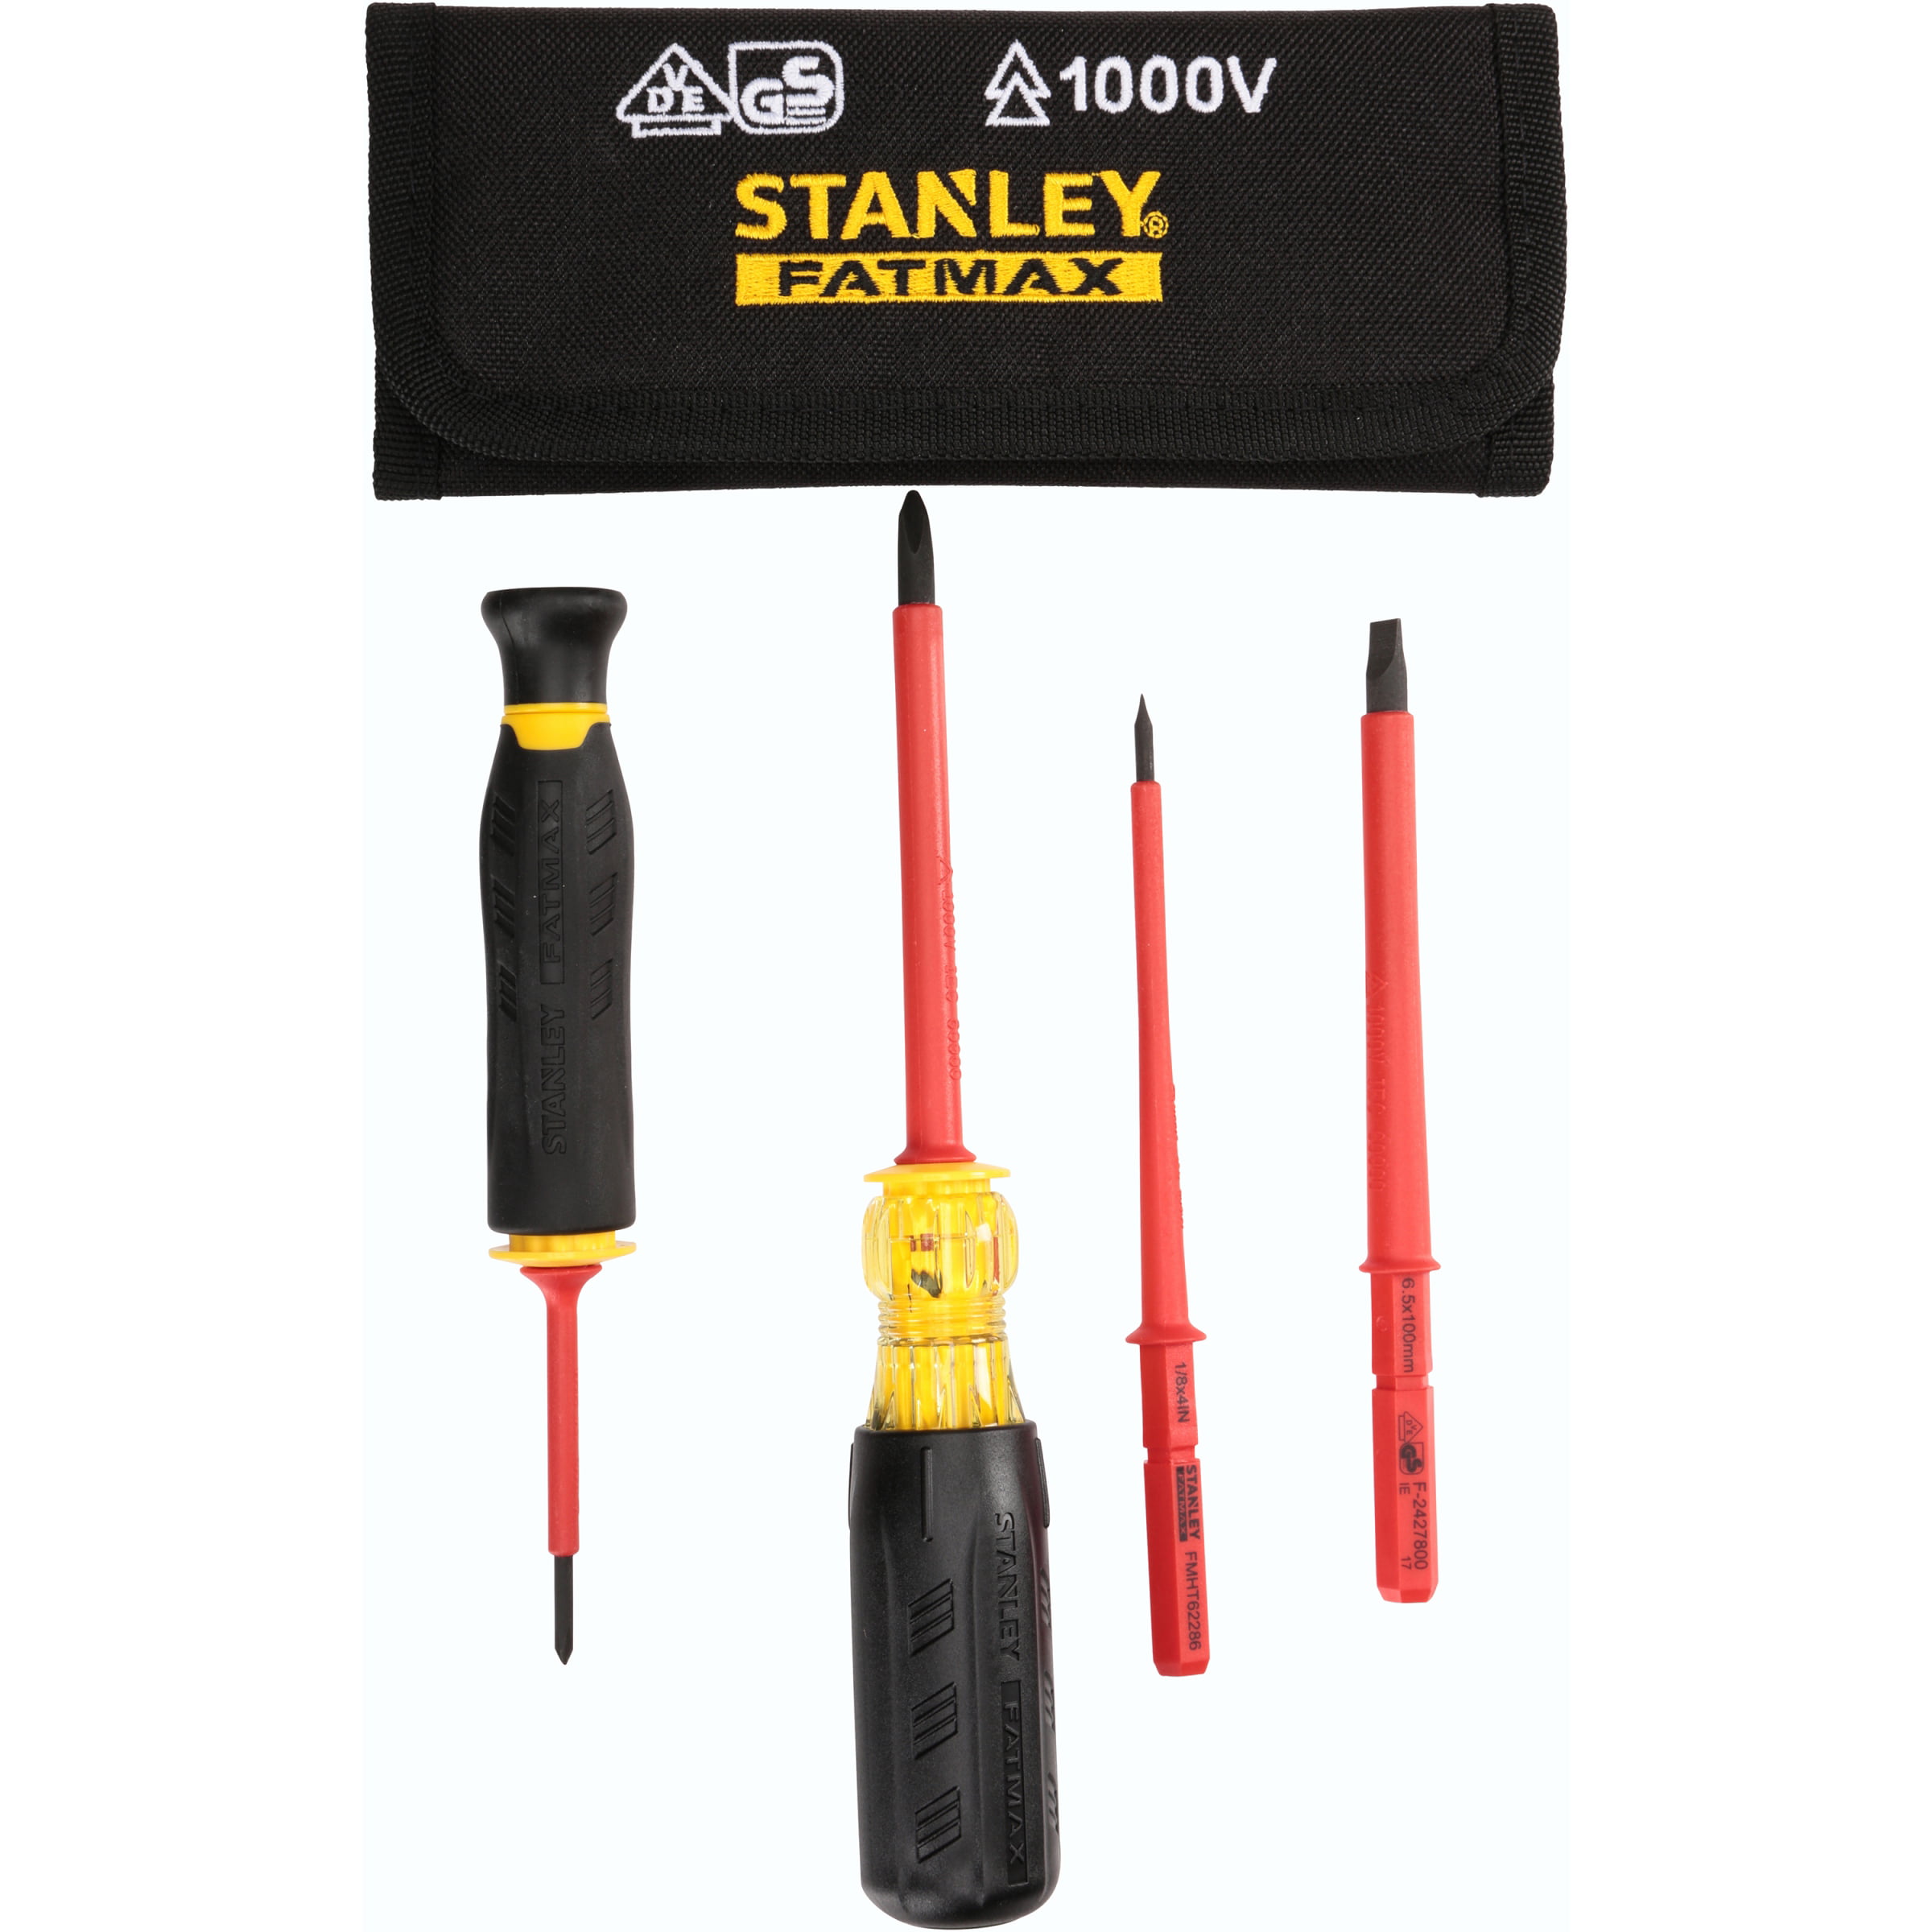 4pc Insulated Precision Screwdriver Set Phillips Slotted Tool DIY Home Garage